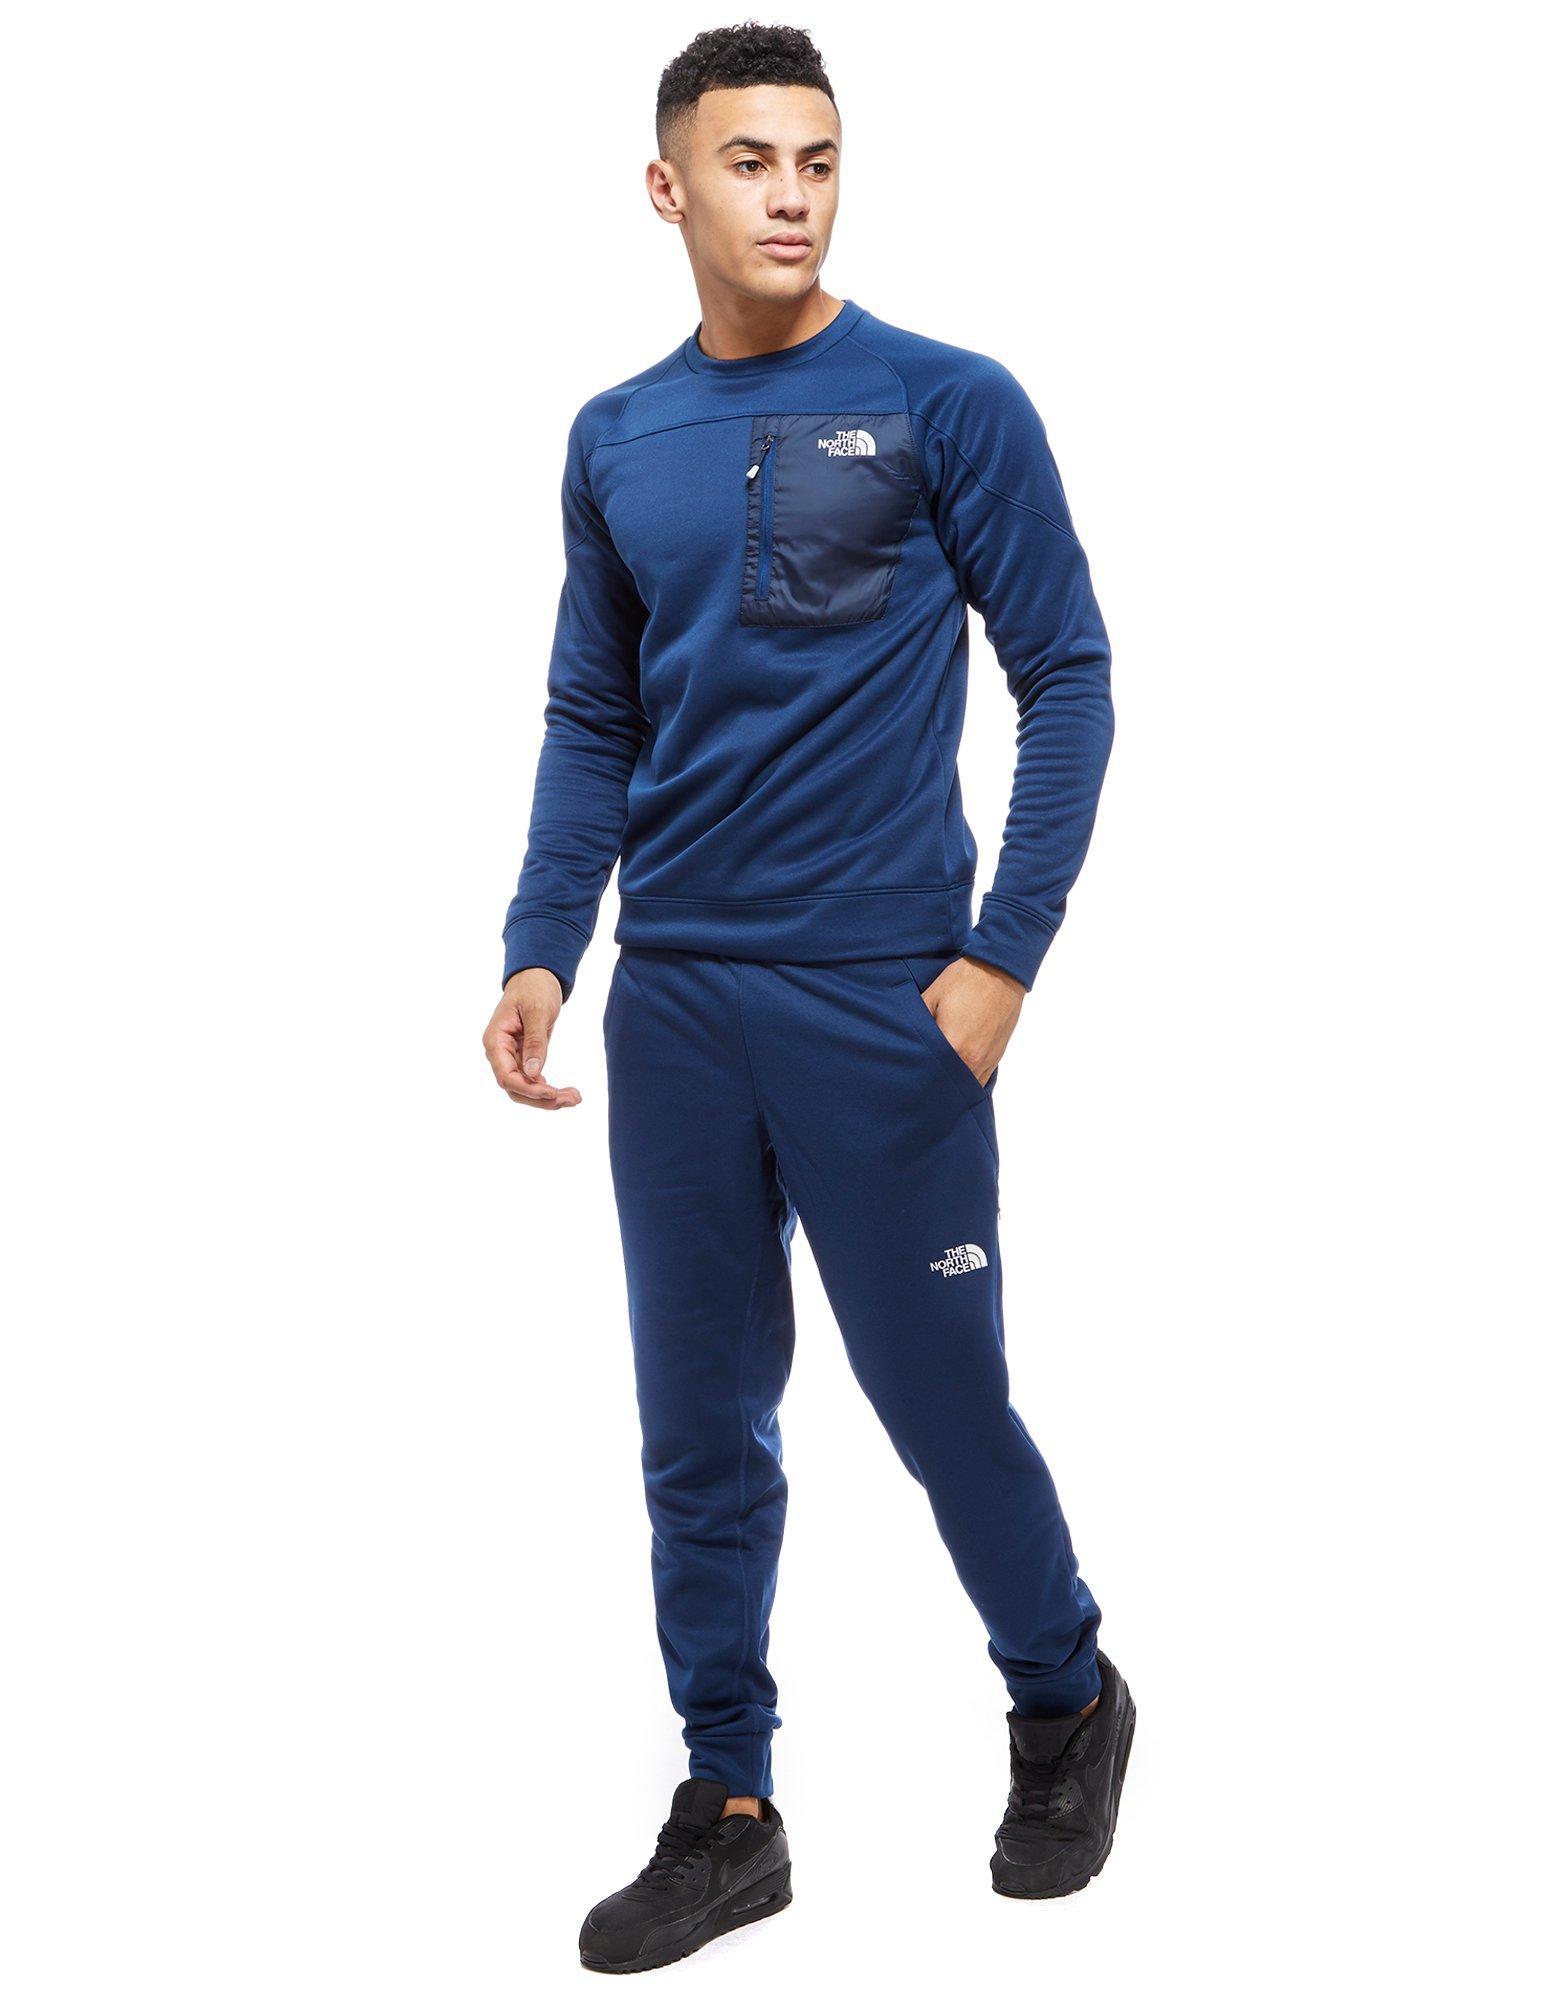 the north face tracksuit mens sale